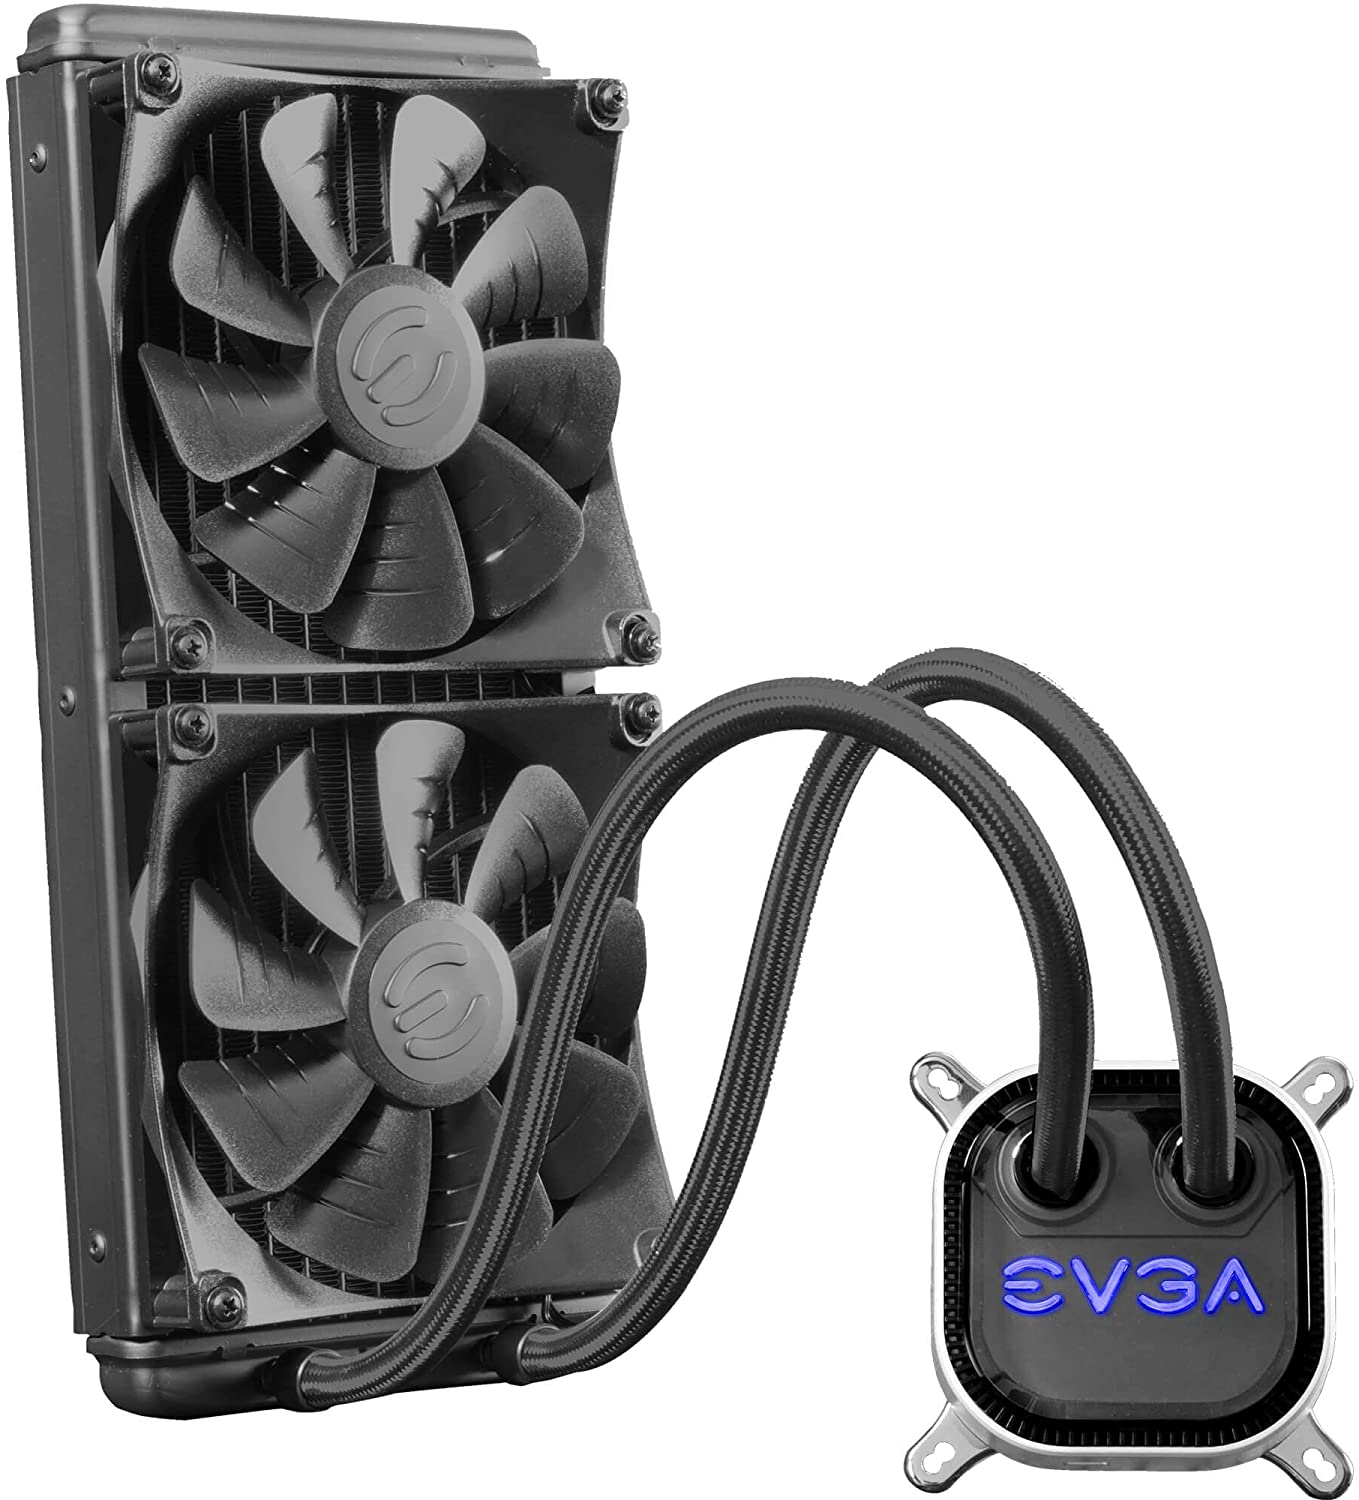 EVGA CLC 280mm All-In-One RGB Liquid CPU Cooler $50 + Free Shipping